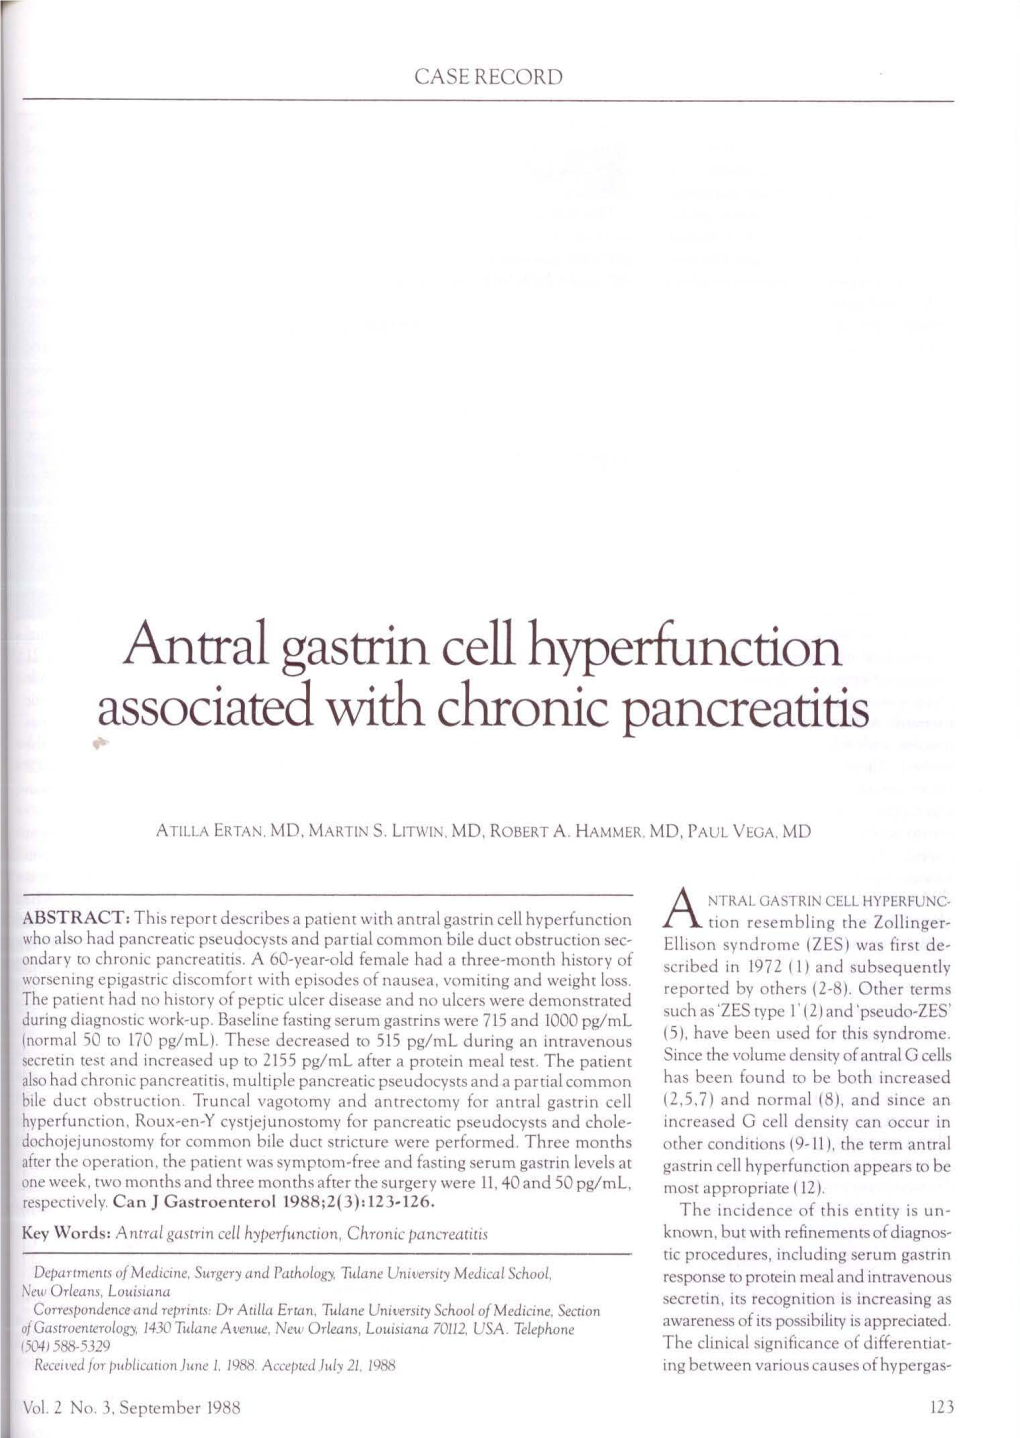 Antral Gastrin Cell Hyperfunction Associated with Chronic Pancreatitis